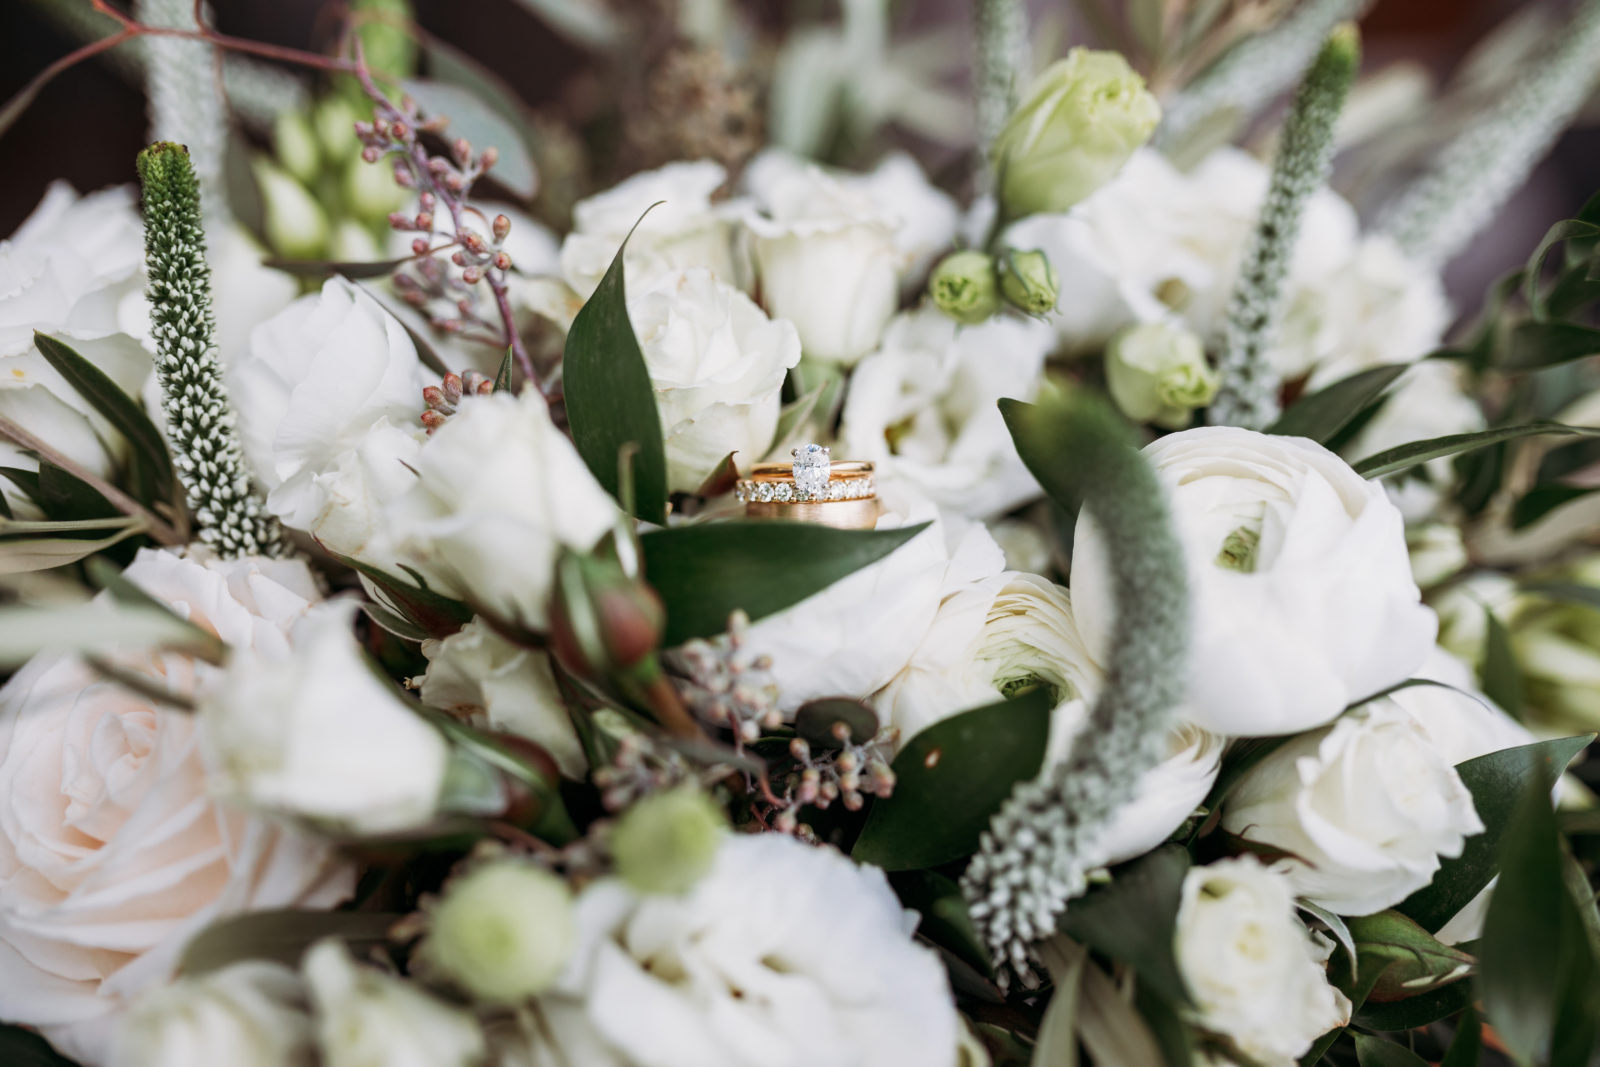 white wedding bouquet with rings